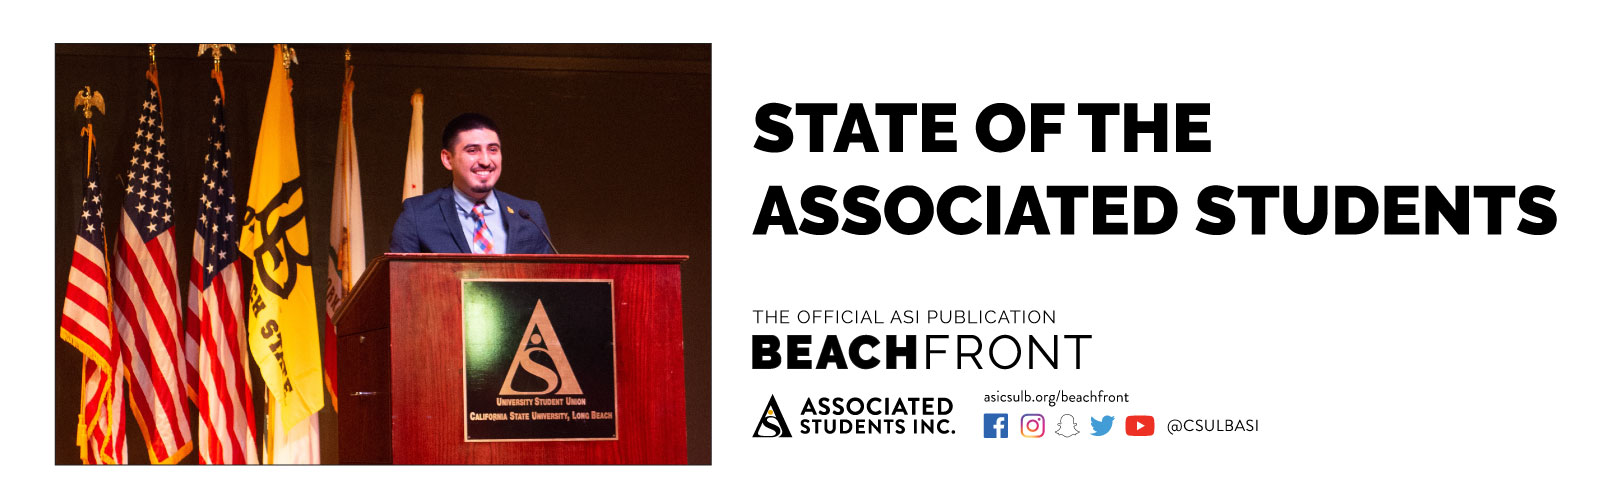 State of the Associated Students Speech